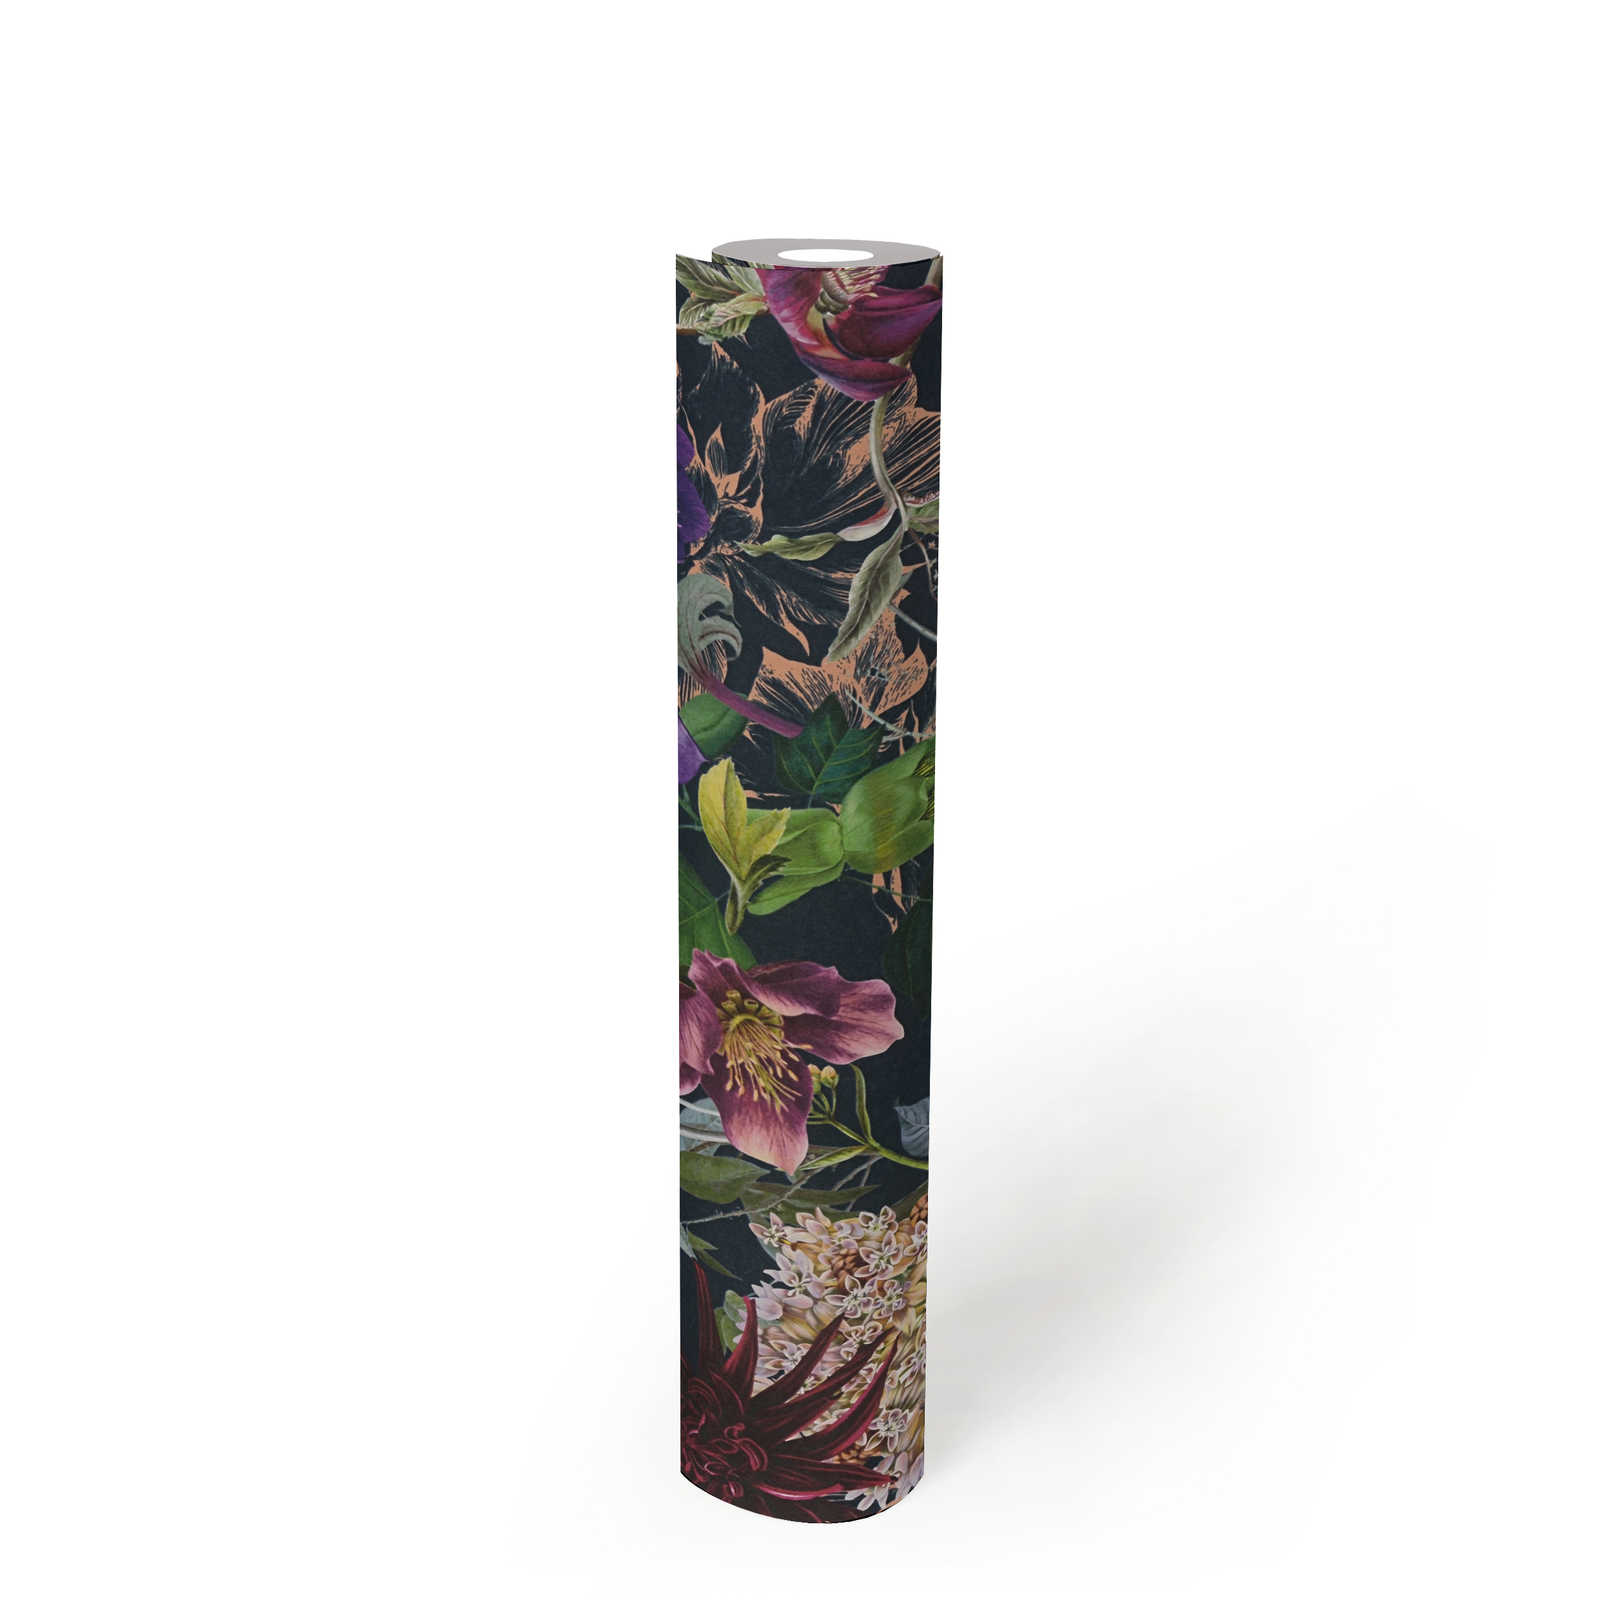             Black wallpaper with colourful flowers - pink, black
        